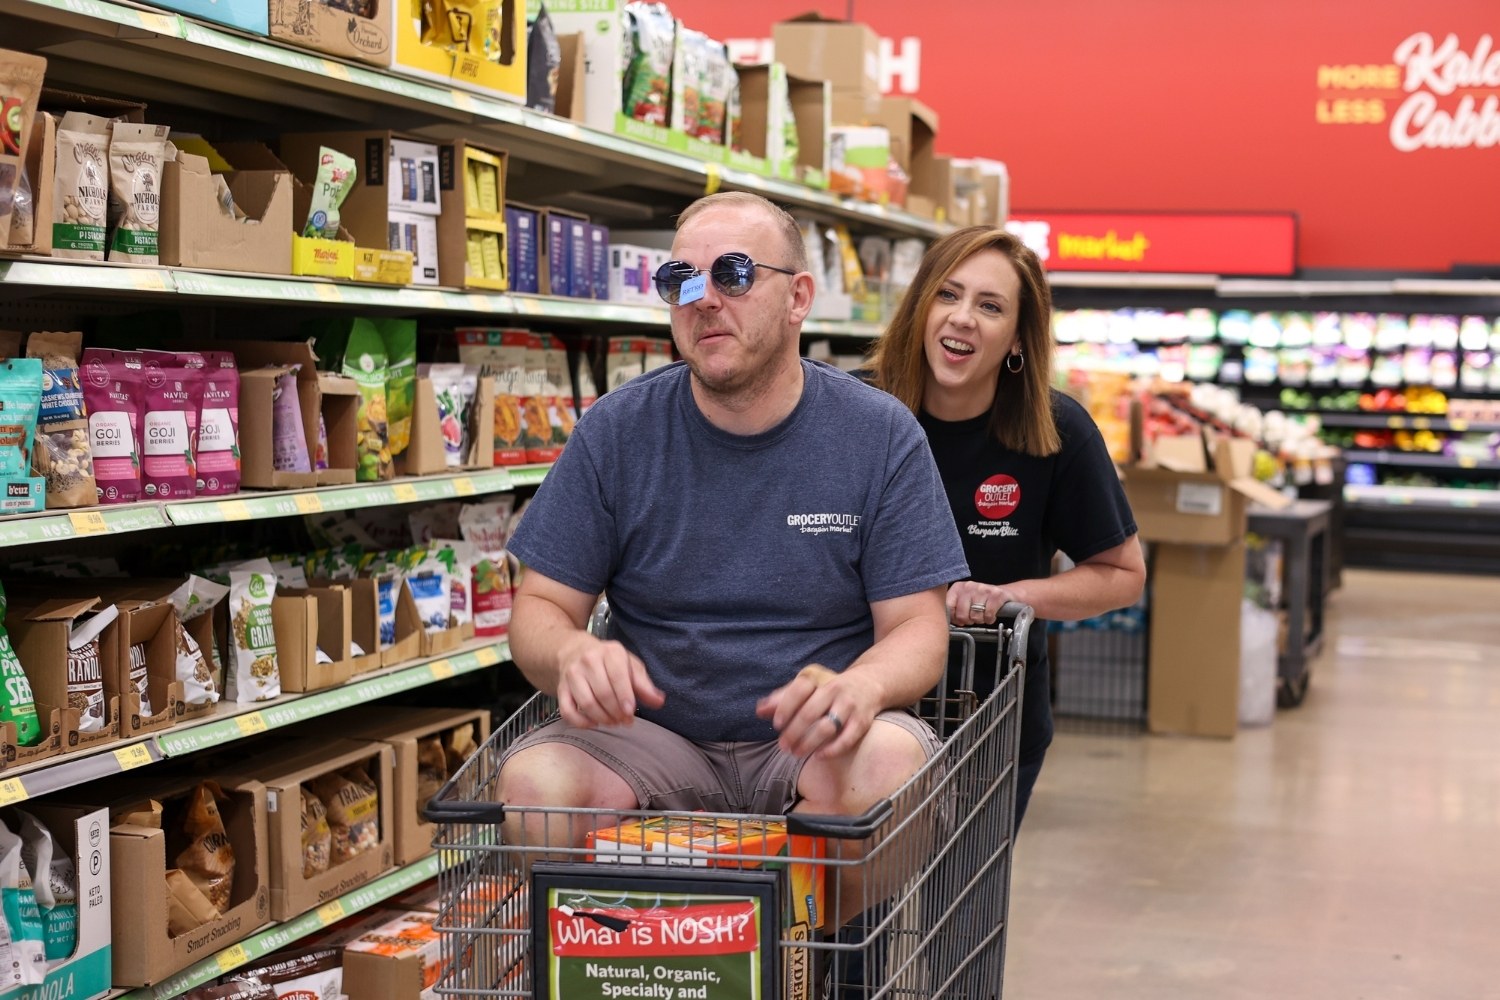 Grocery Outlet owners complete annual fund drive for LifePath 1